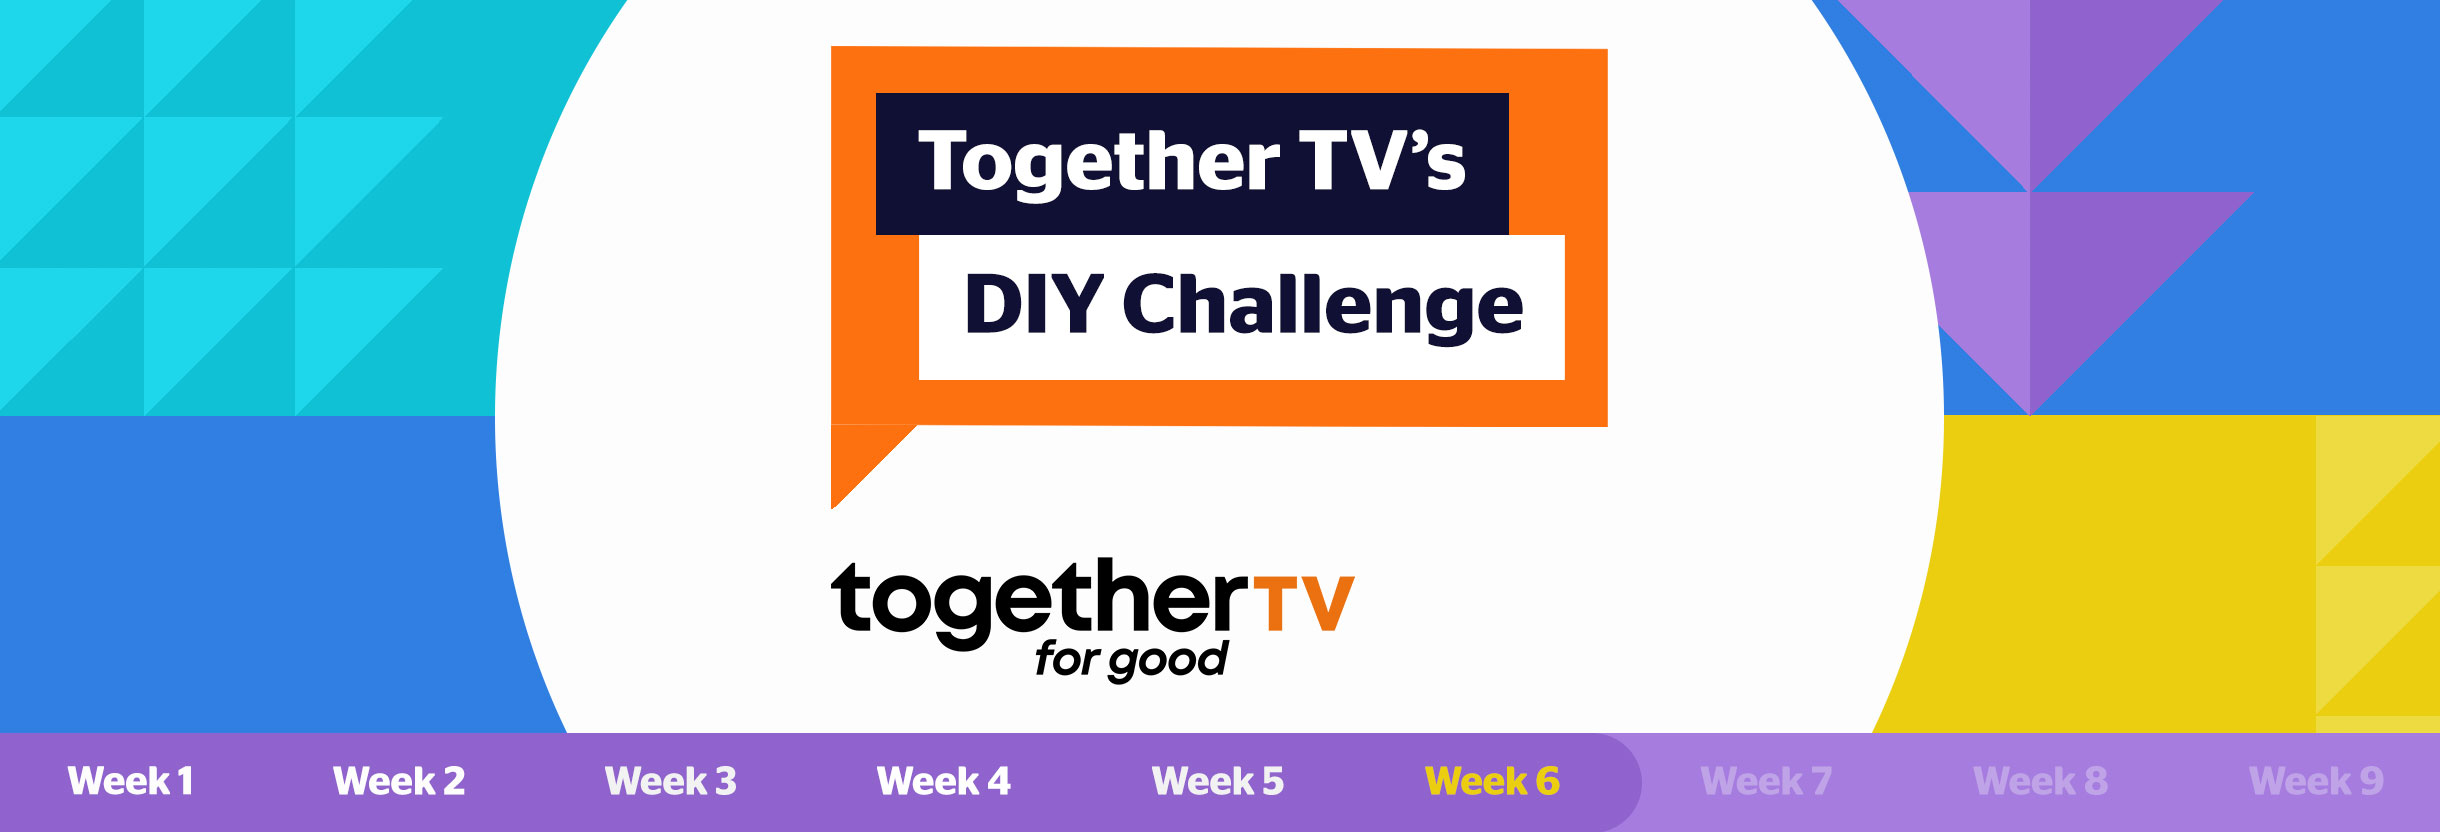 Welcome to week 6 of the DIY Challenge